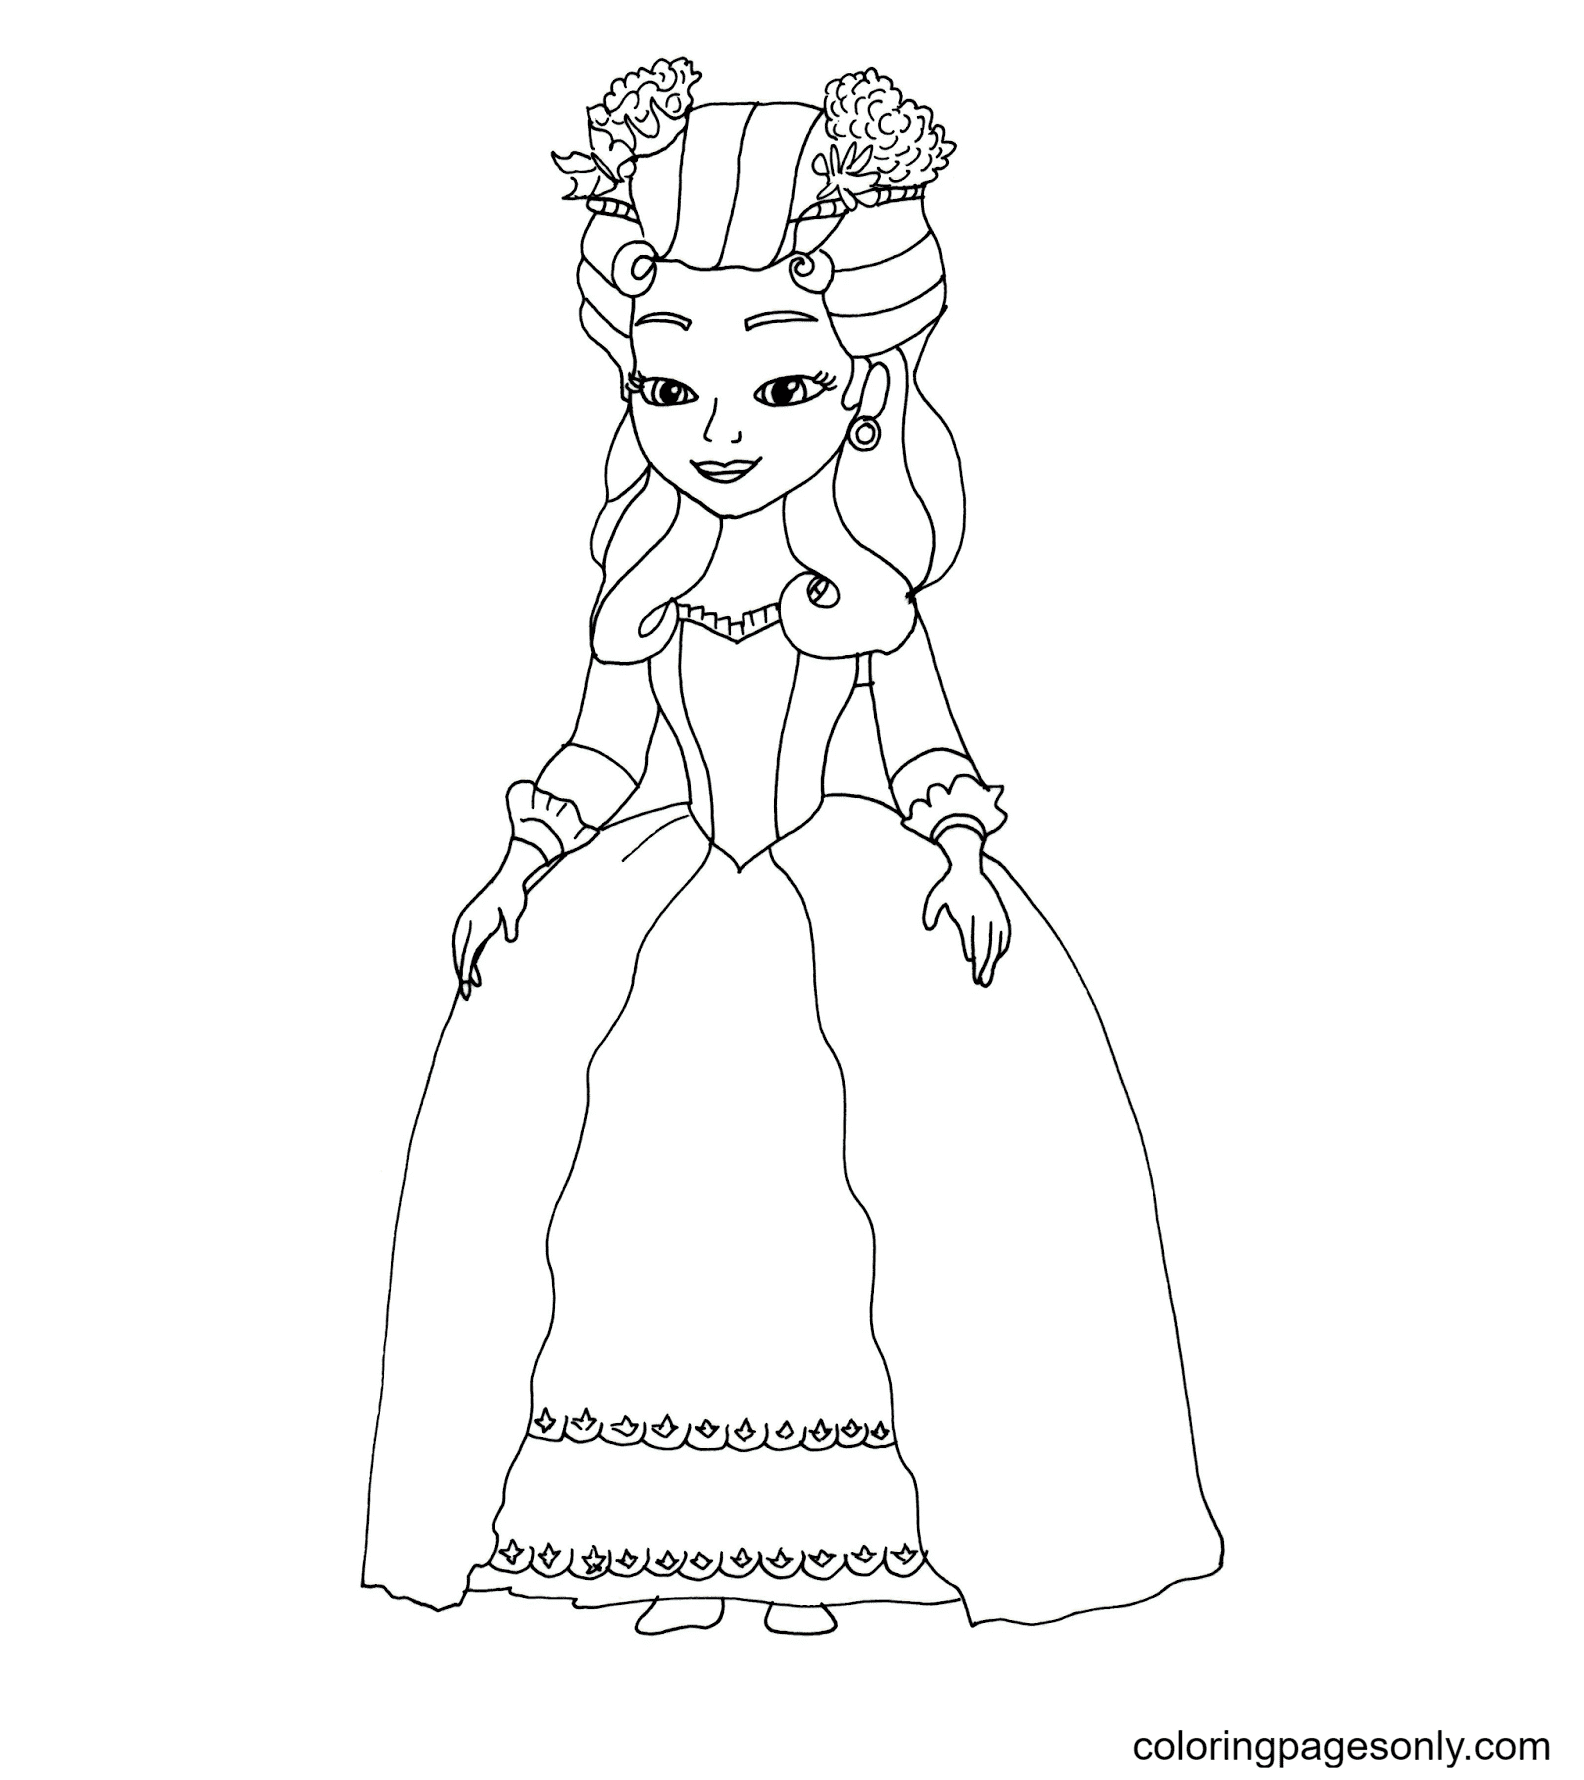 Princess Hildegard from Sofia the First Coloring Page